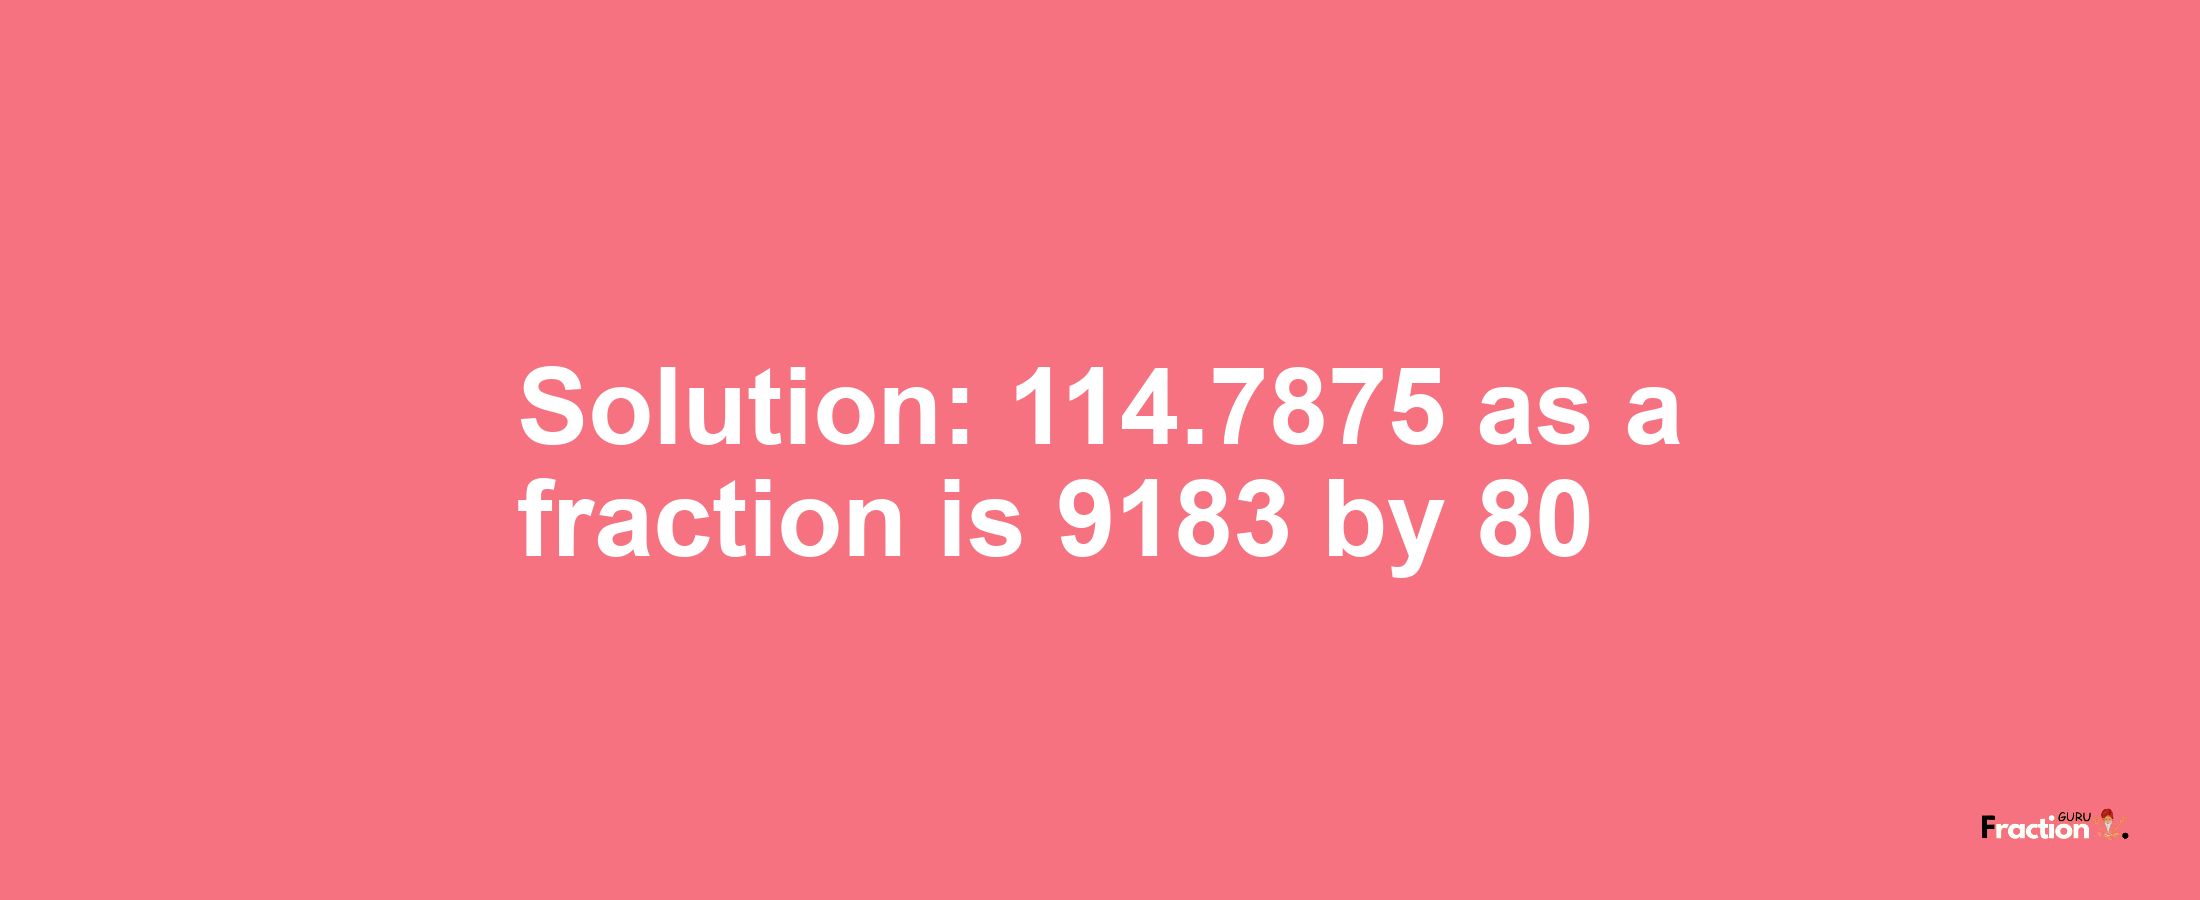 Solution:114.7875 as a fraction is 9183/80